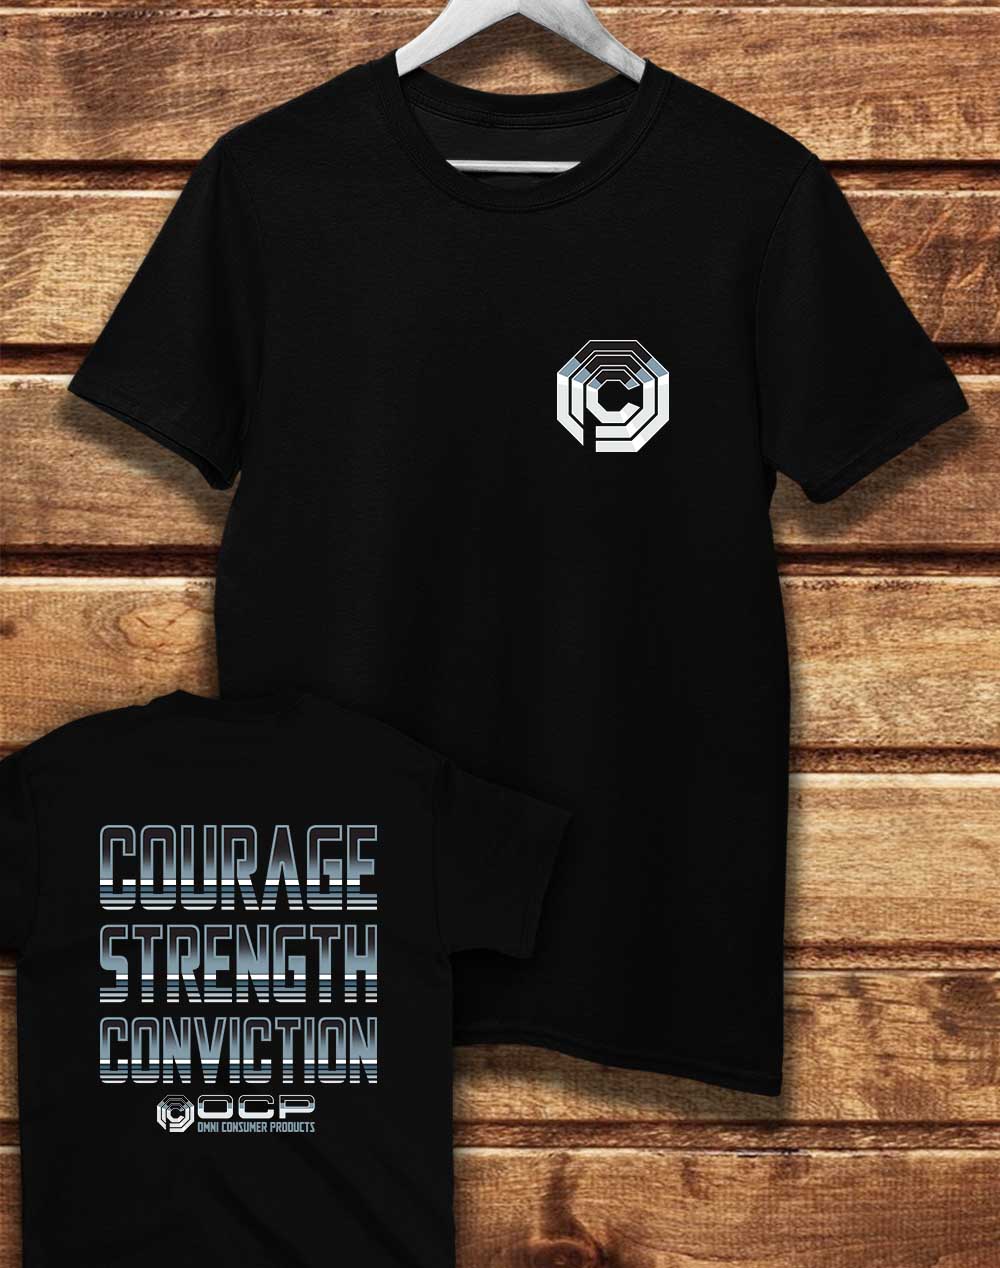 Black - DELUXE OCP Courage Strength Conviction with Back Print Organic Cotton T-Shirt